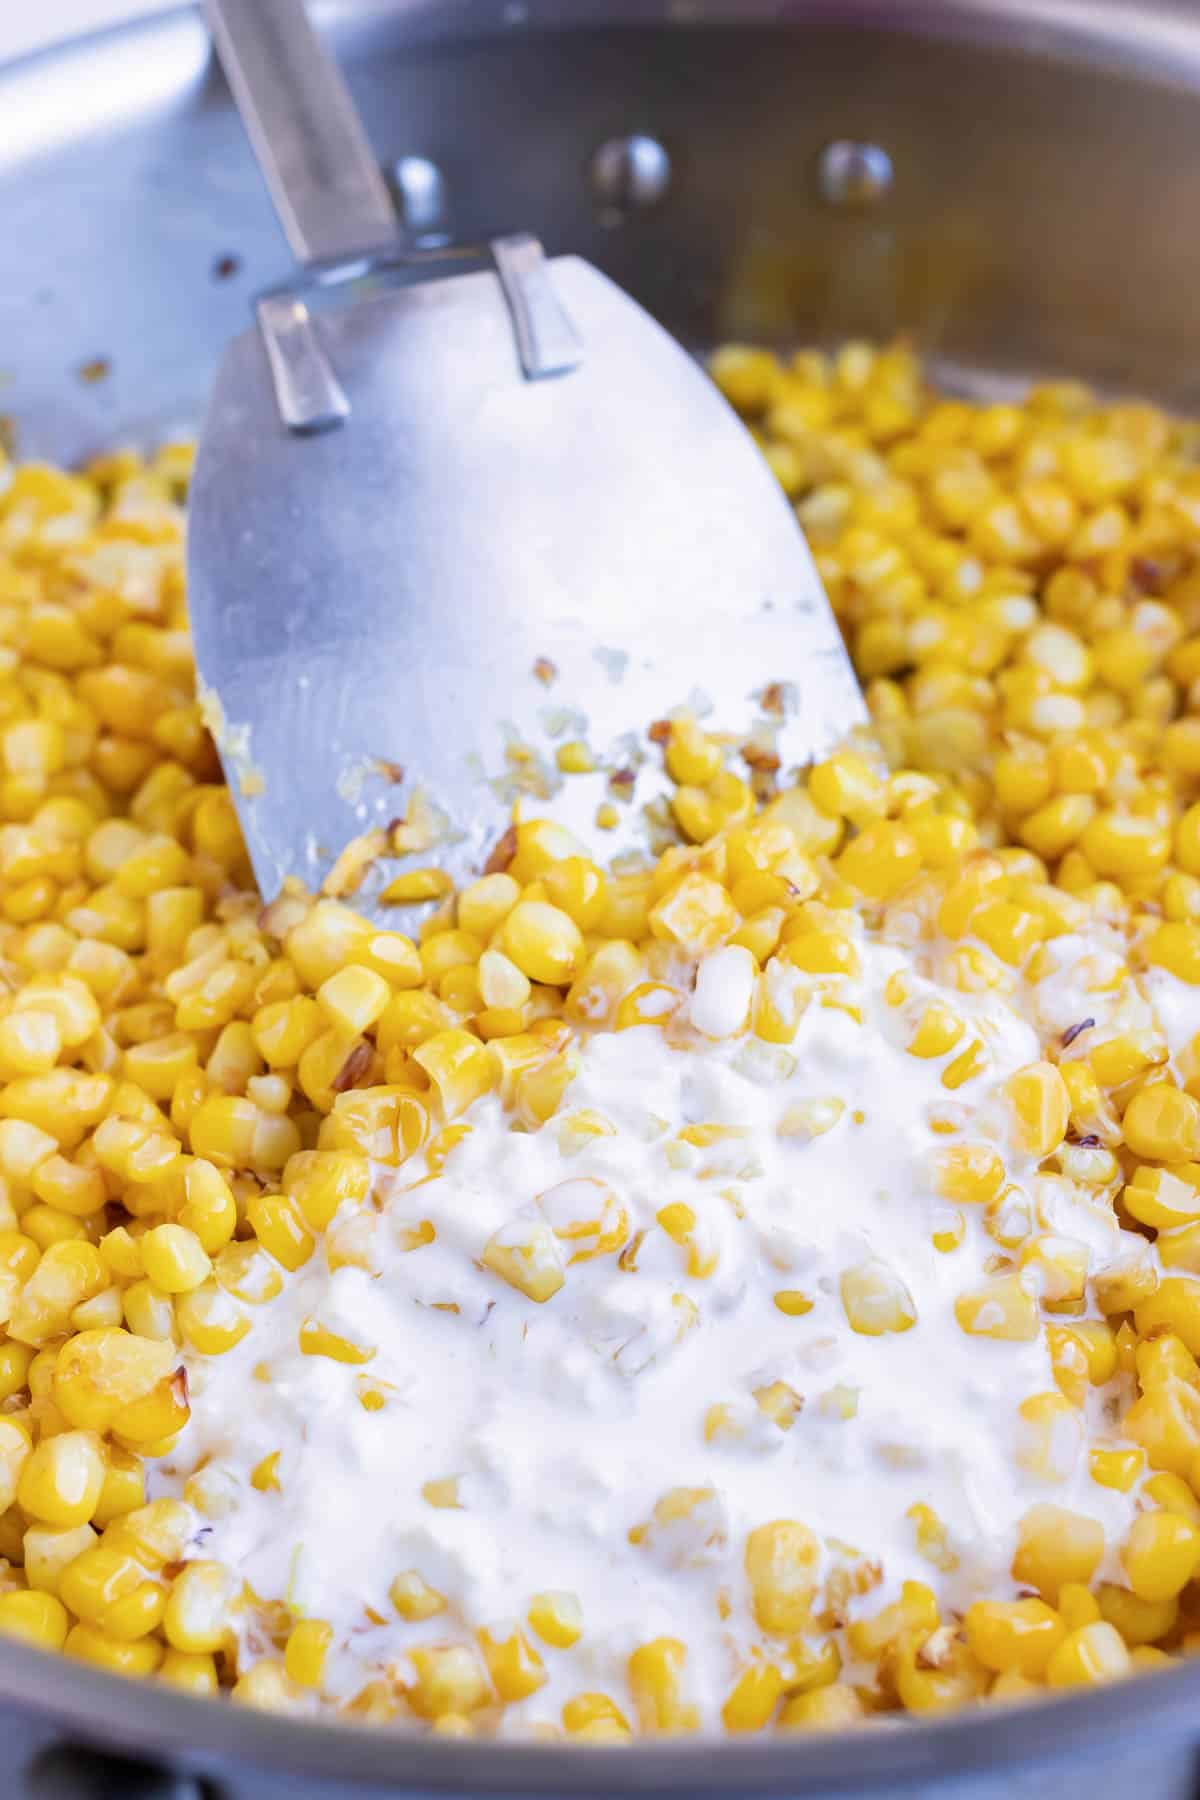 Sauce is added to the corn in the skillet.